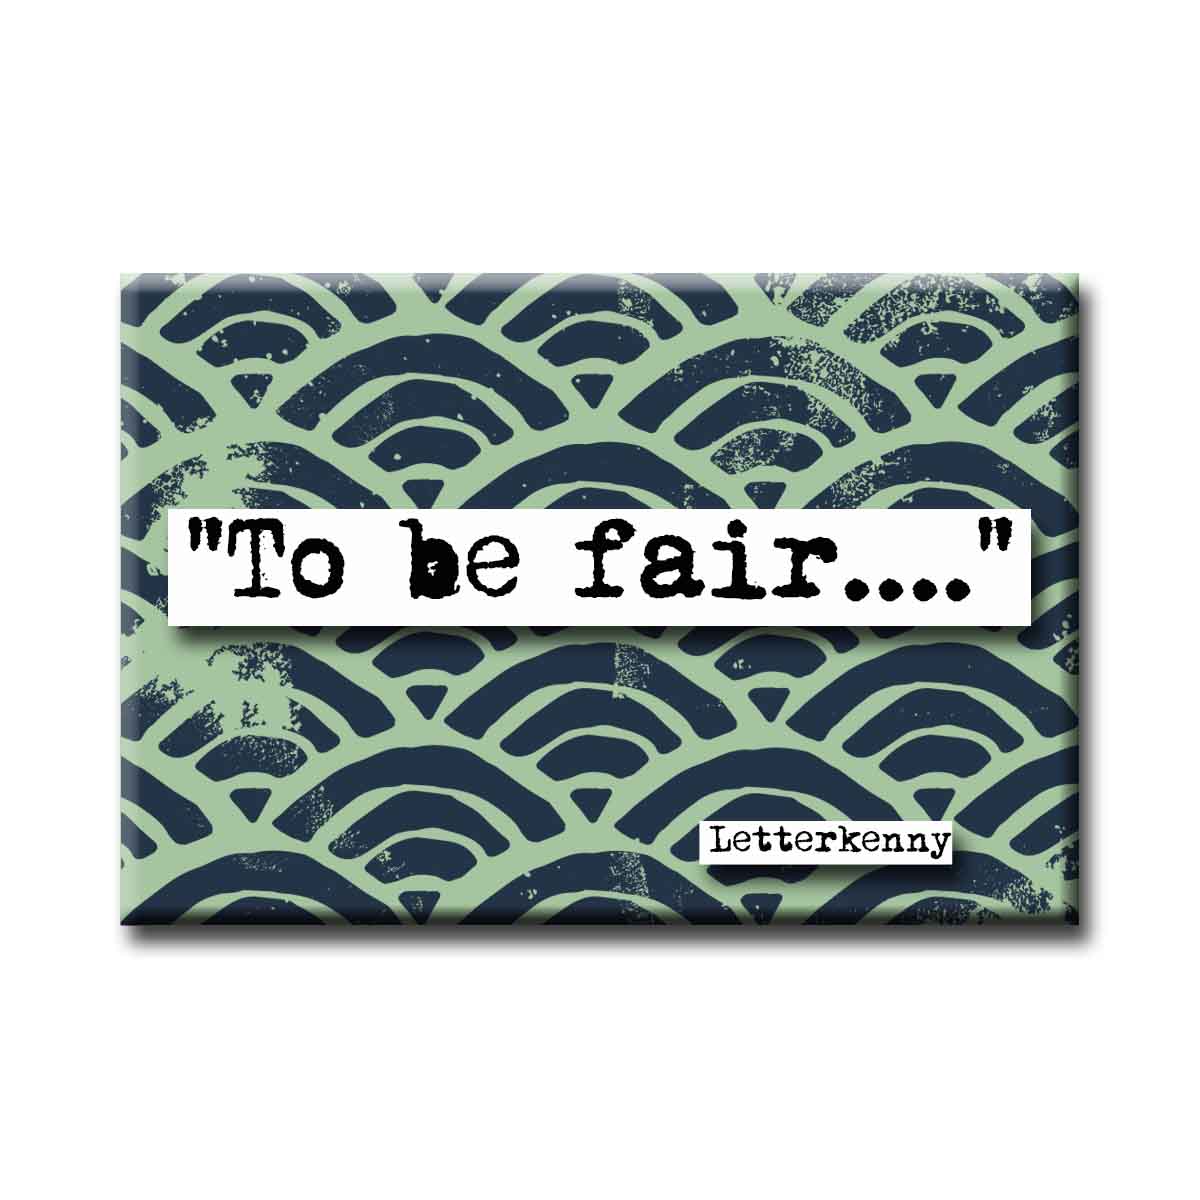 Letterkenny To Be Fair Quote Refrigerator Magnet